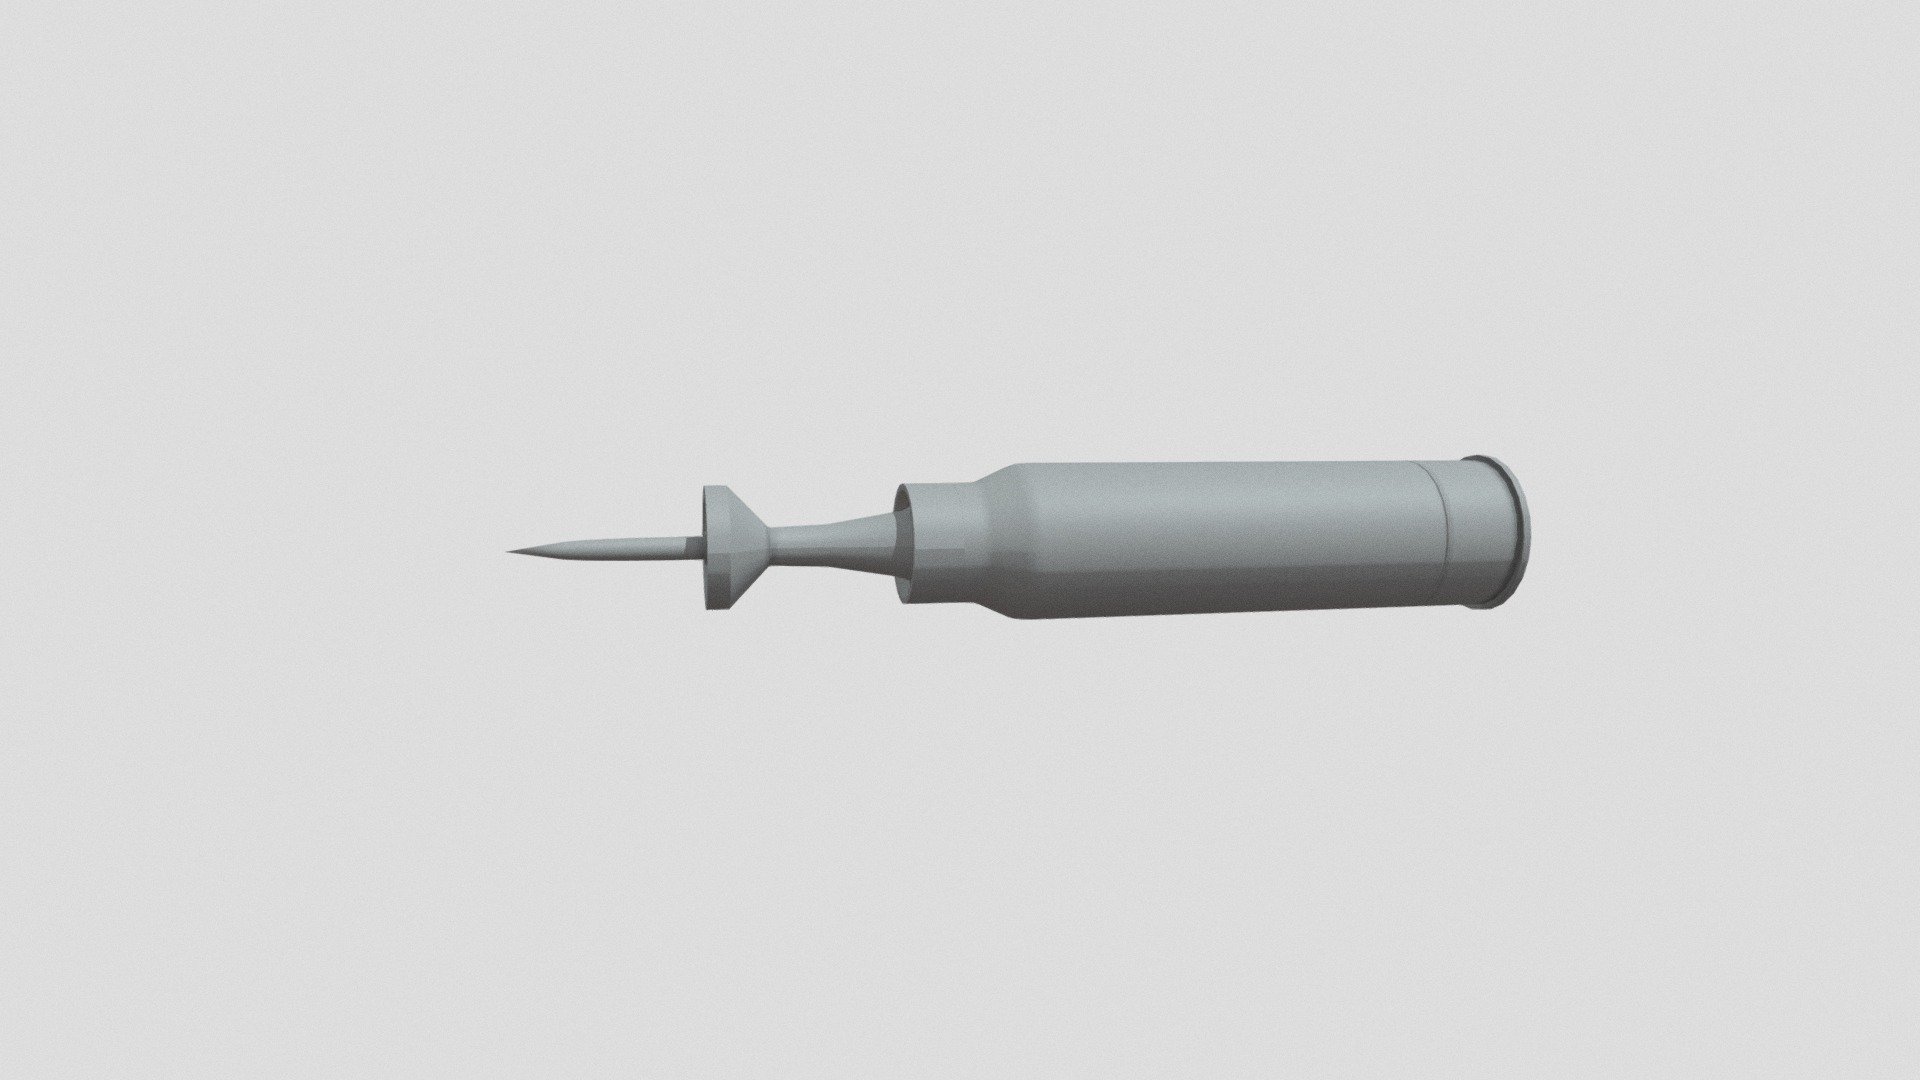 This is a model of a DM53 APFSDS 120mm Shell used by NATO tanks using the Rh-120 tank cannon 3d model